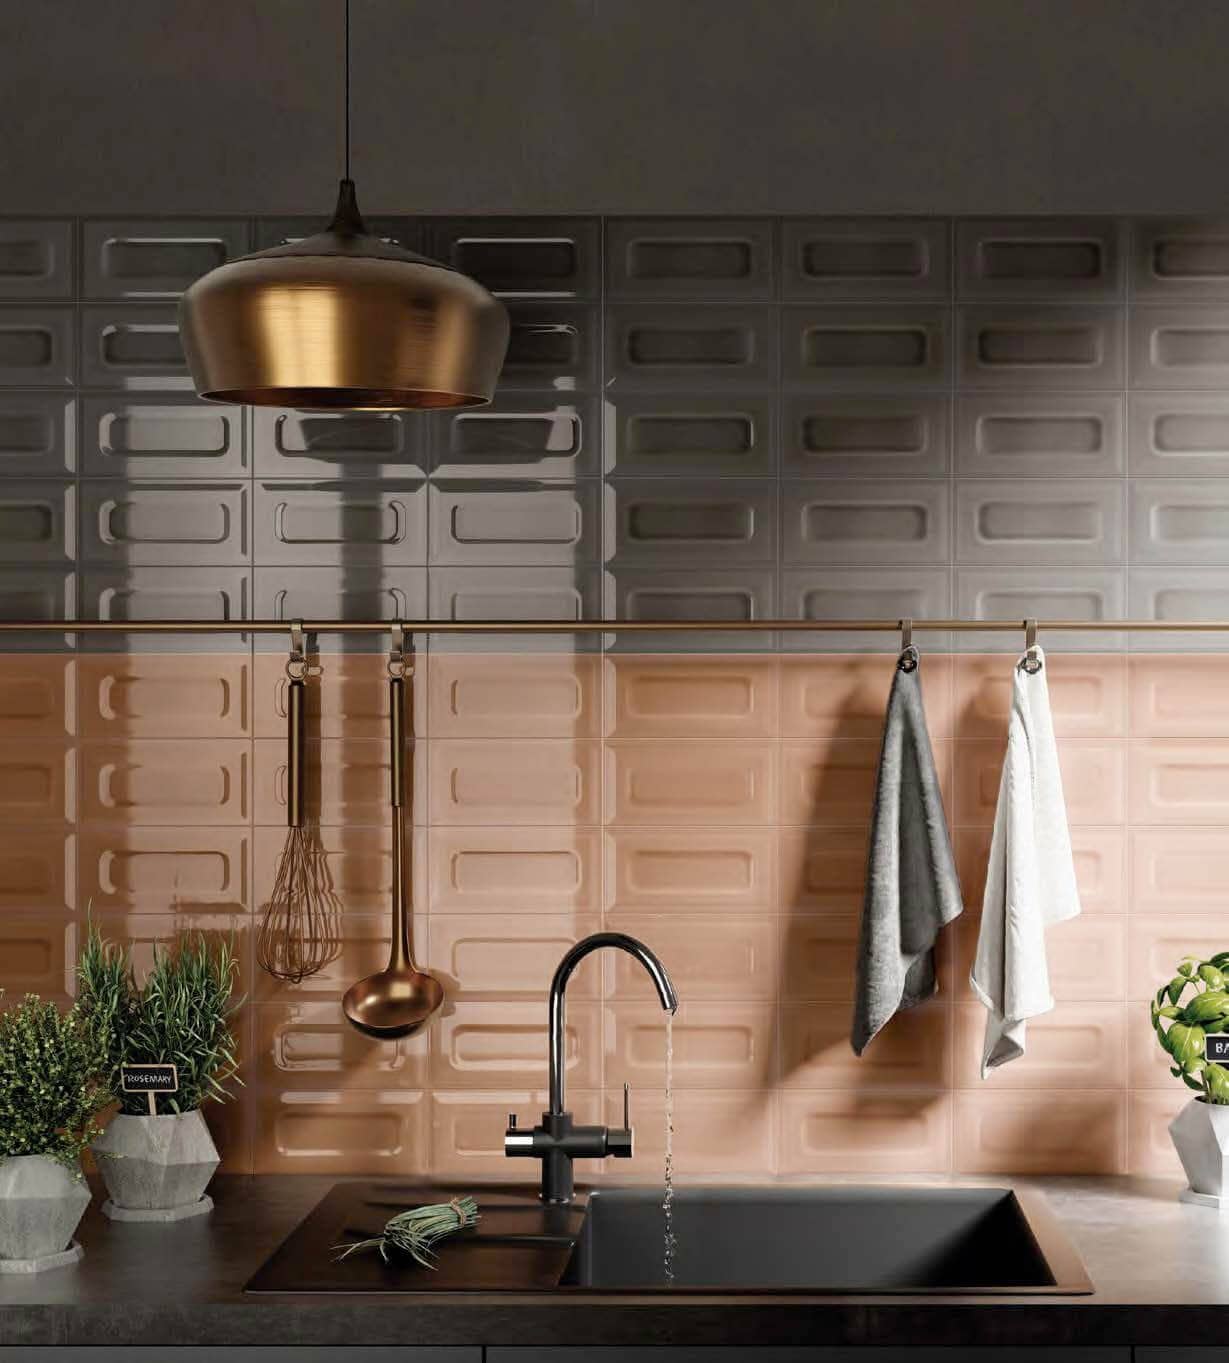 Bathroom blush and black kitchen tiles for a contemporary look